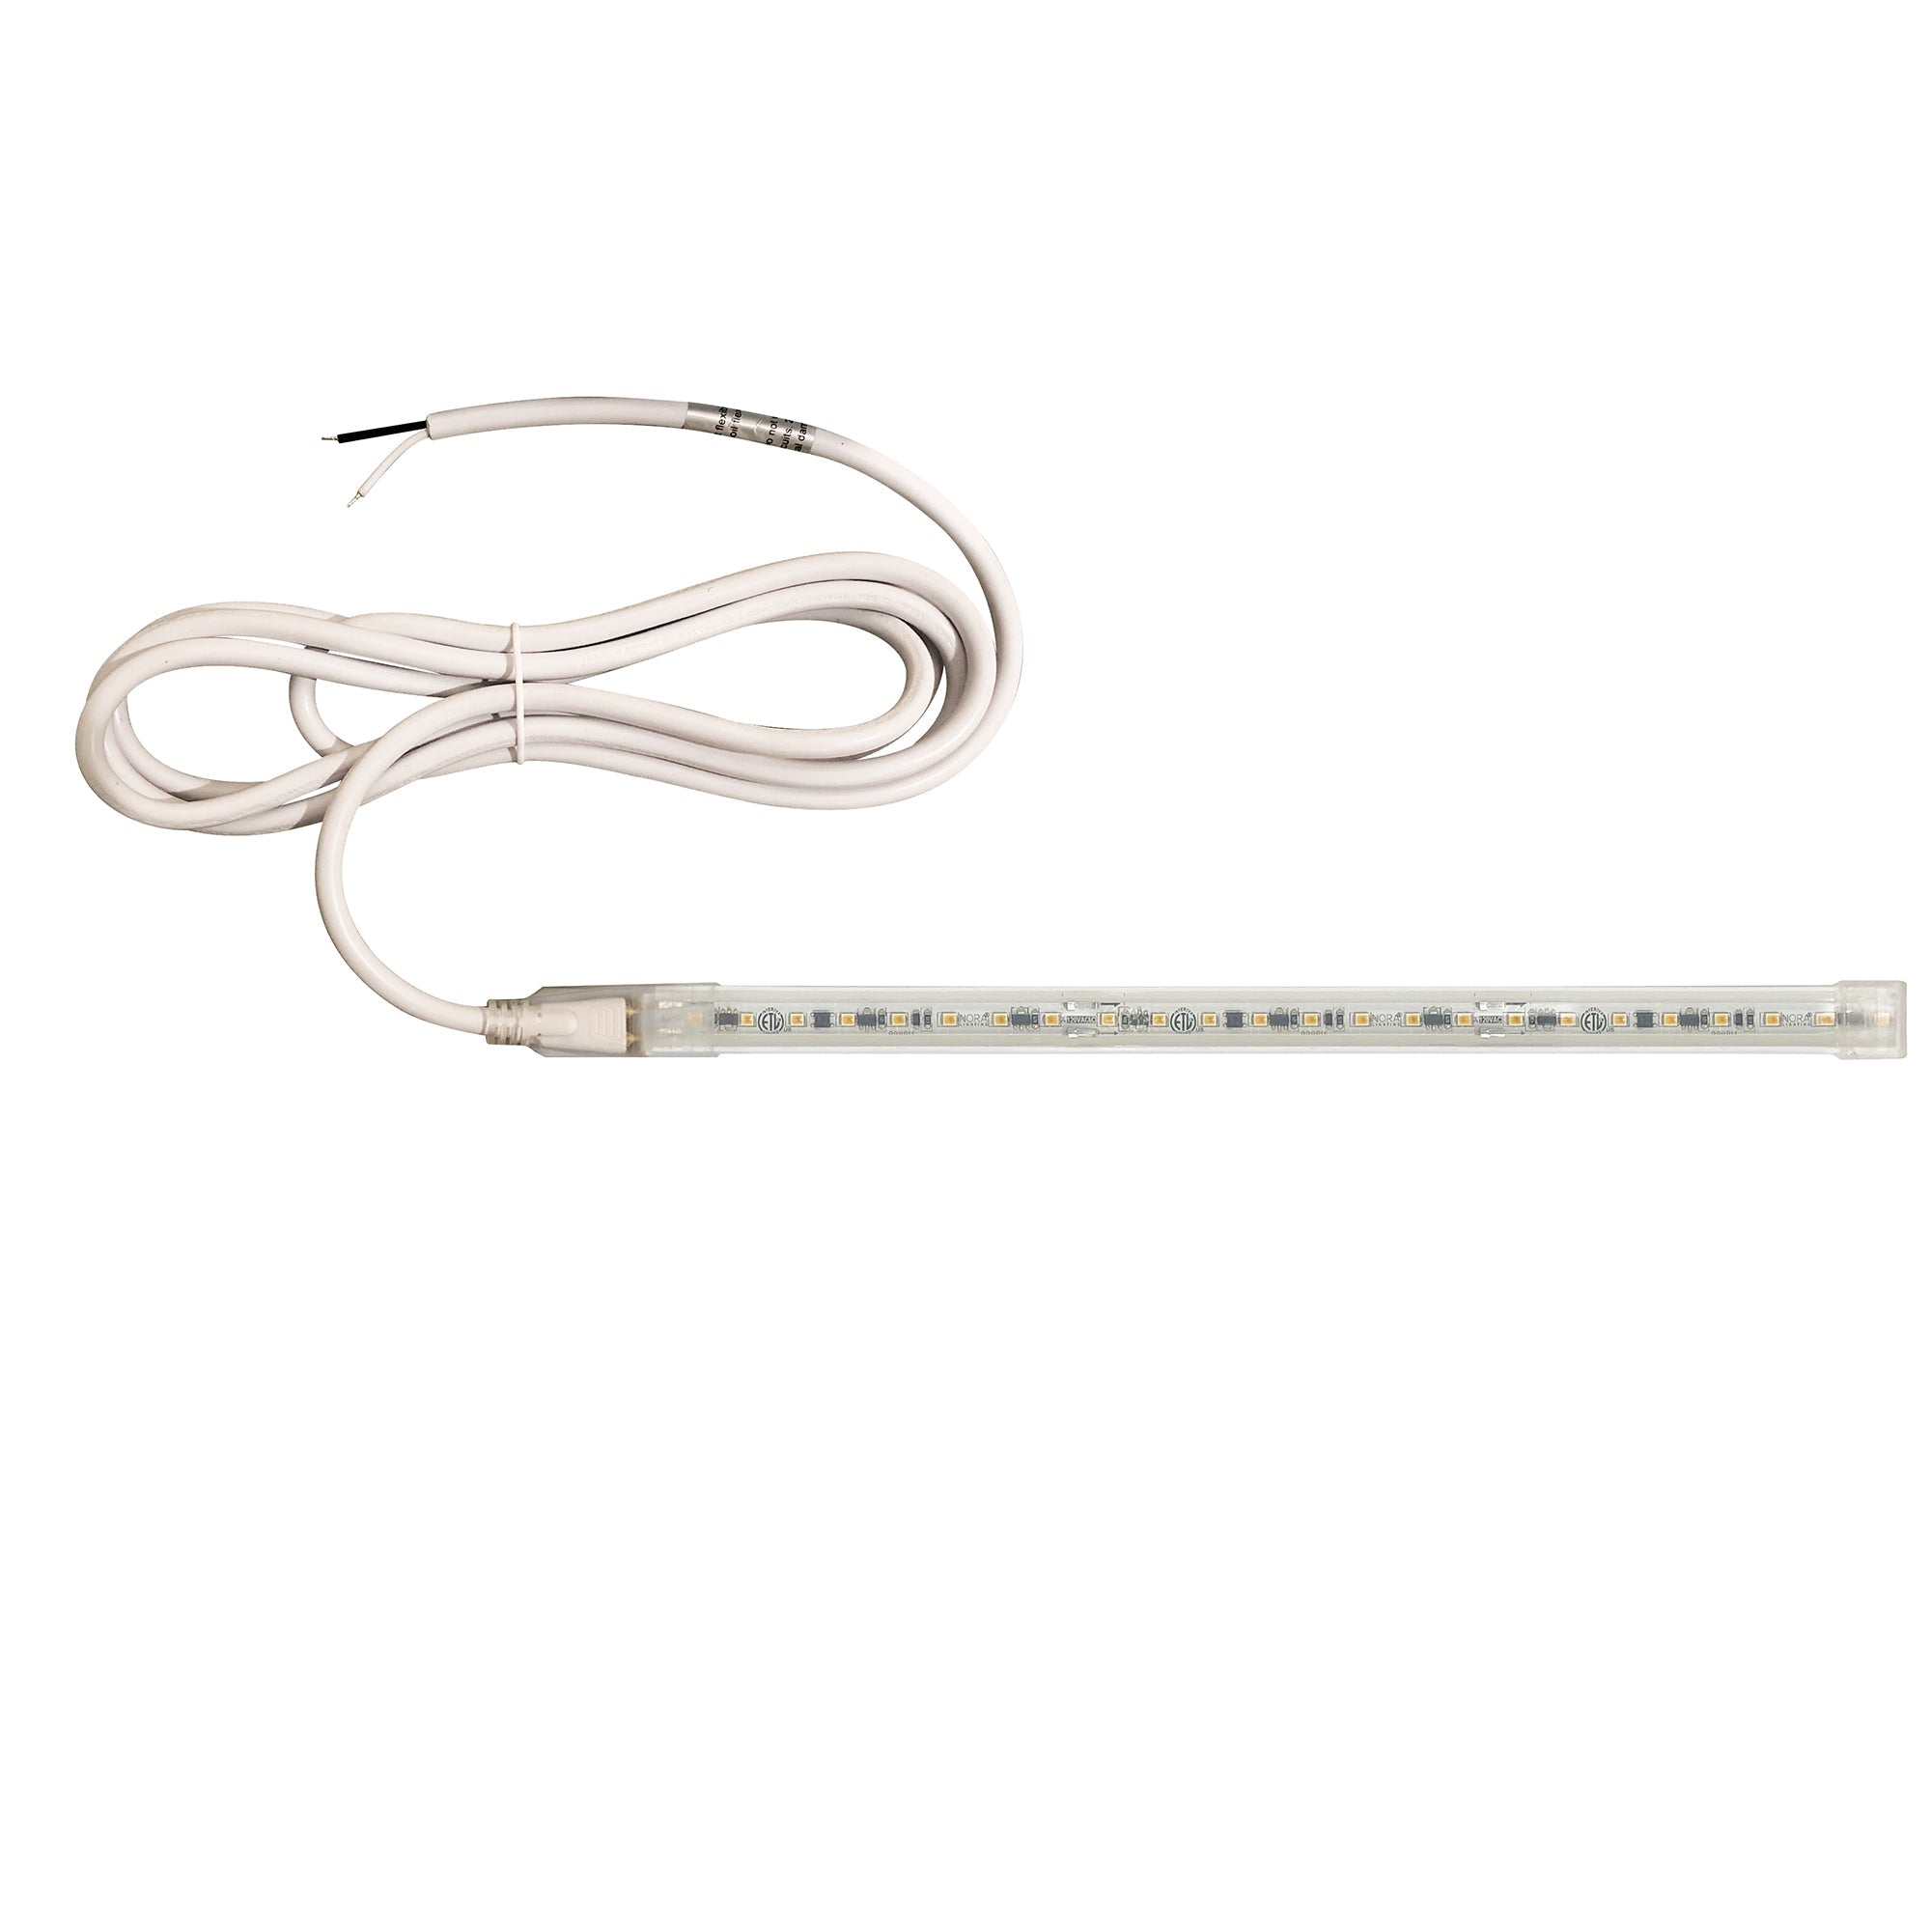 Nora Lighting NUTP13-W55-12-930/HW - Accent / Undercabinet - Custom Cut 55-ft 120V Continuous LED Tape Light, 330lm / 3.6W per foot, 3000K, w/ Mounting Clips and 8' Hardwired Power Cord